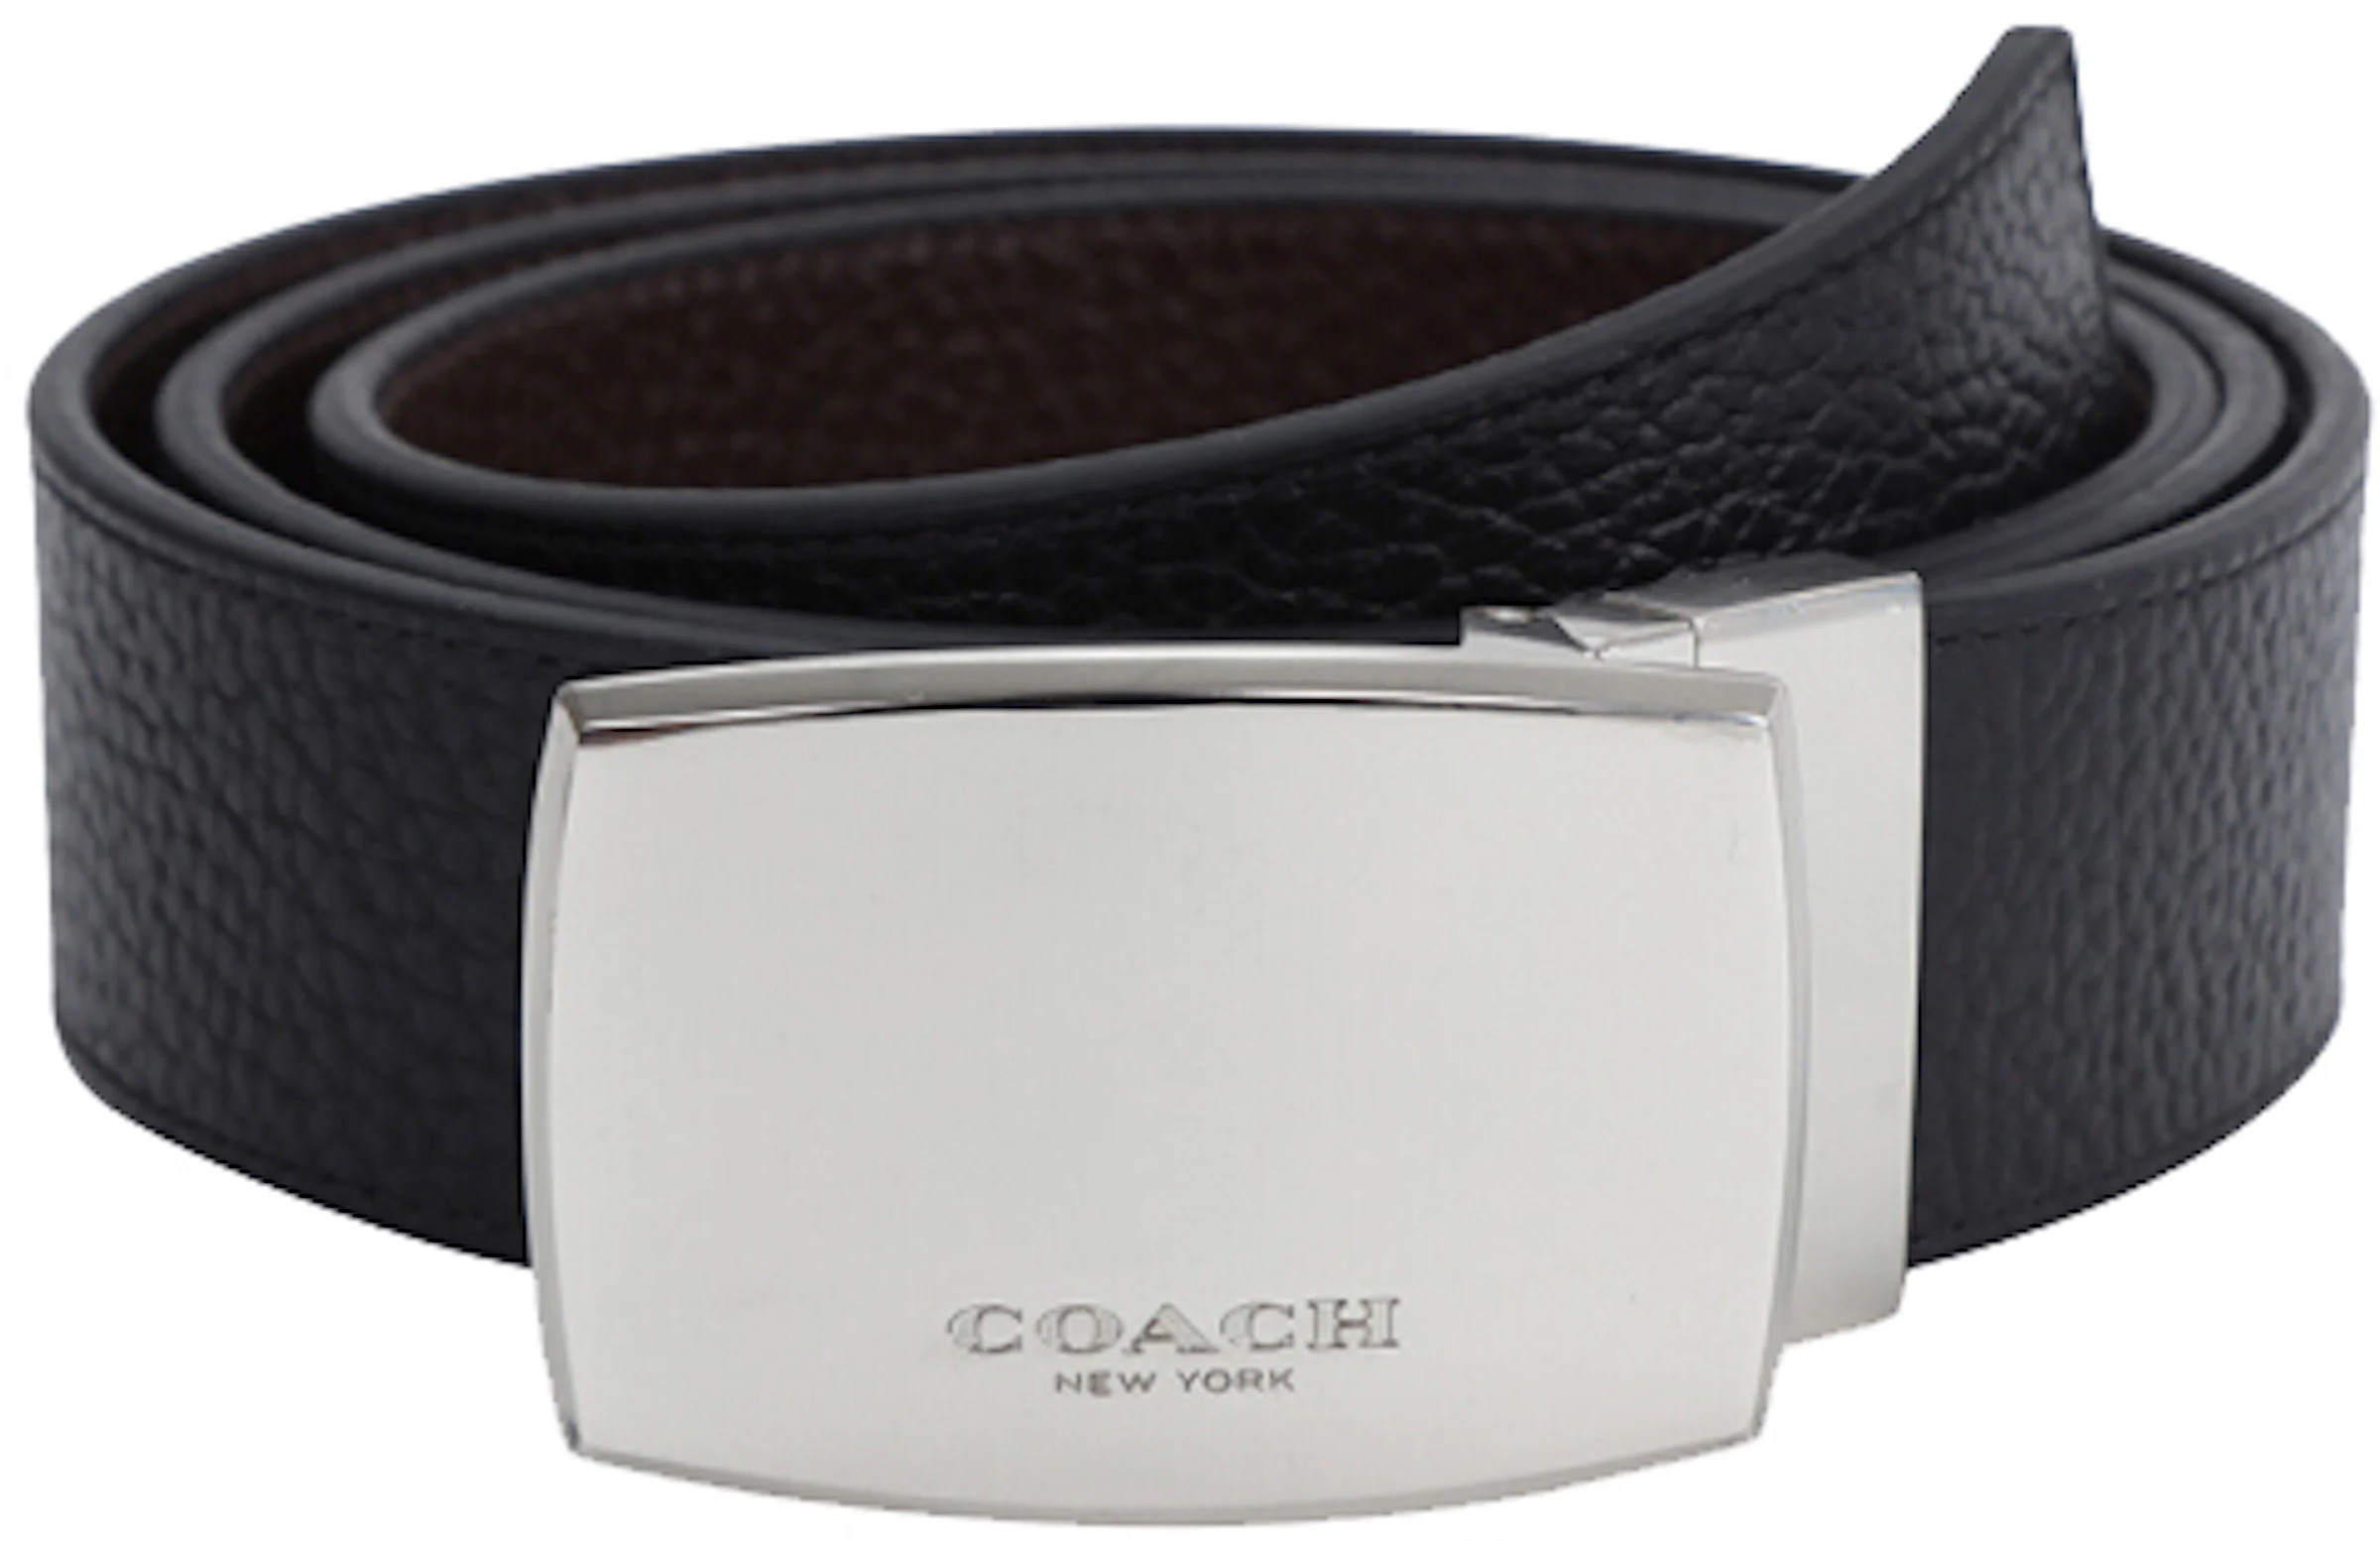 Coach Wide Plaque Reversible Belt Black/Brown in Pebbled Leather